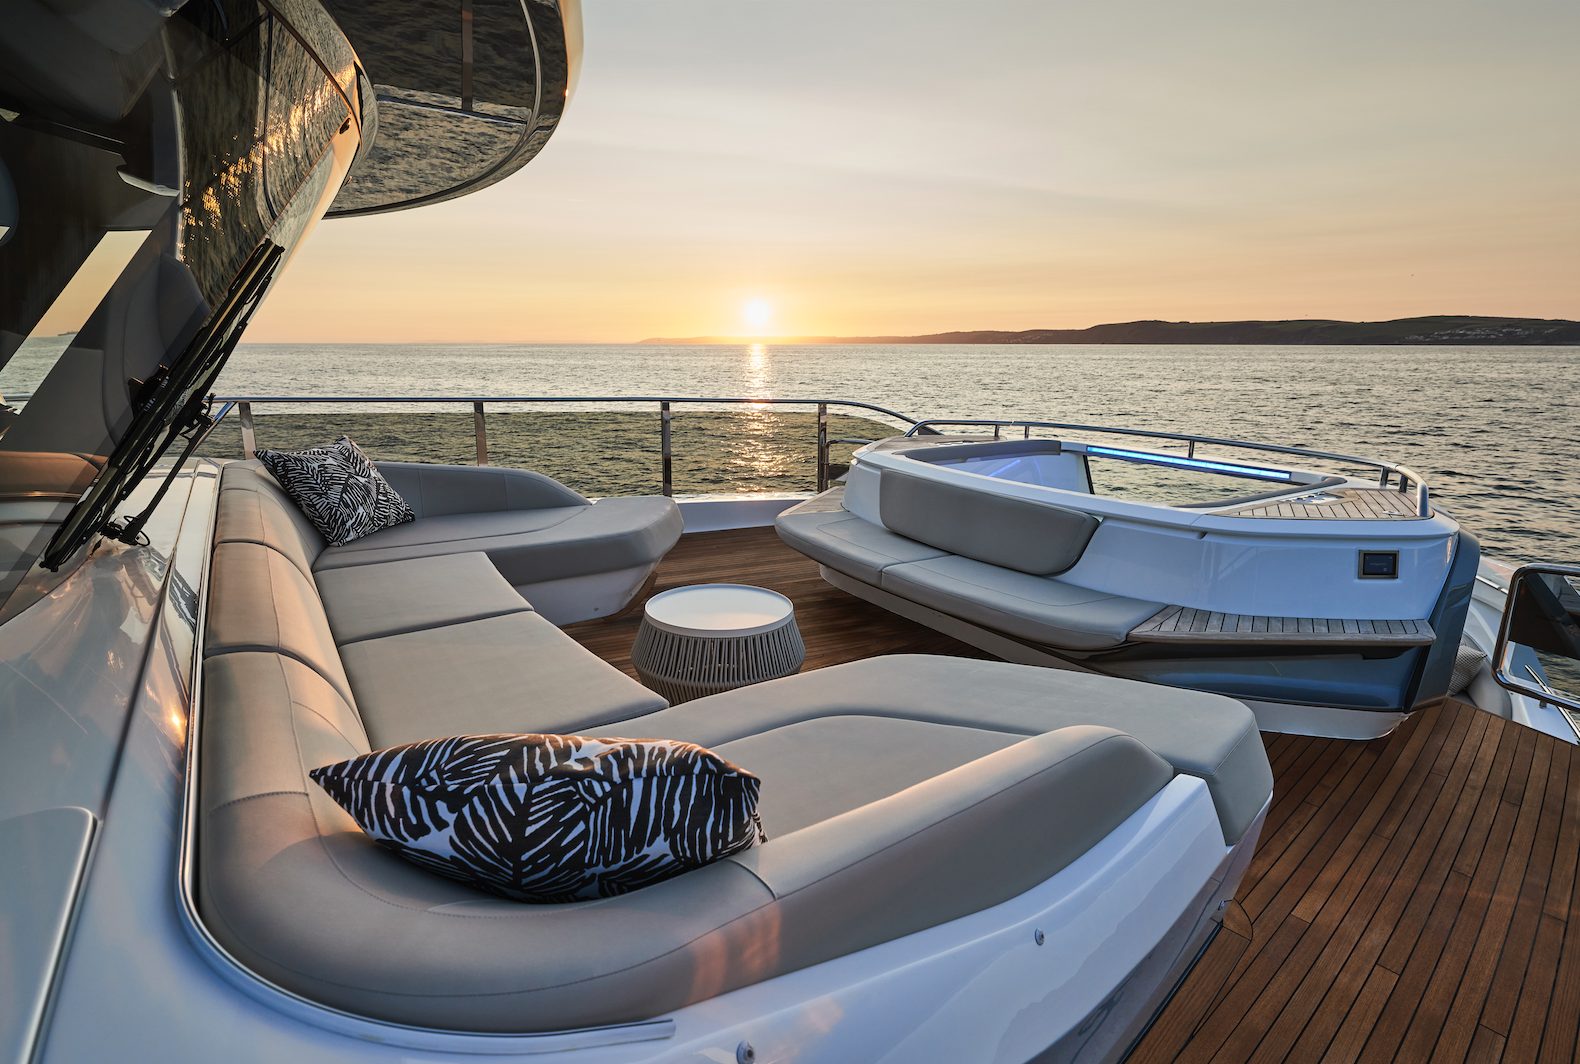 Sunset on a Princess yacht with a hot tub. 